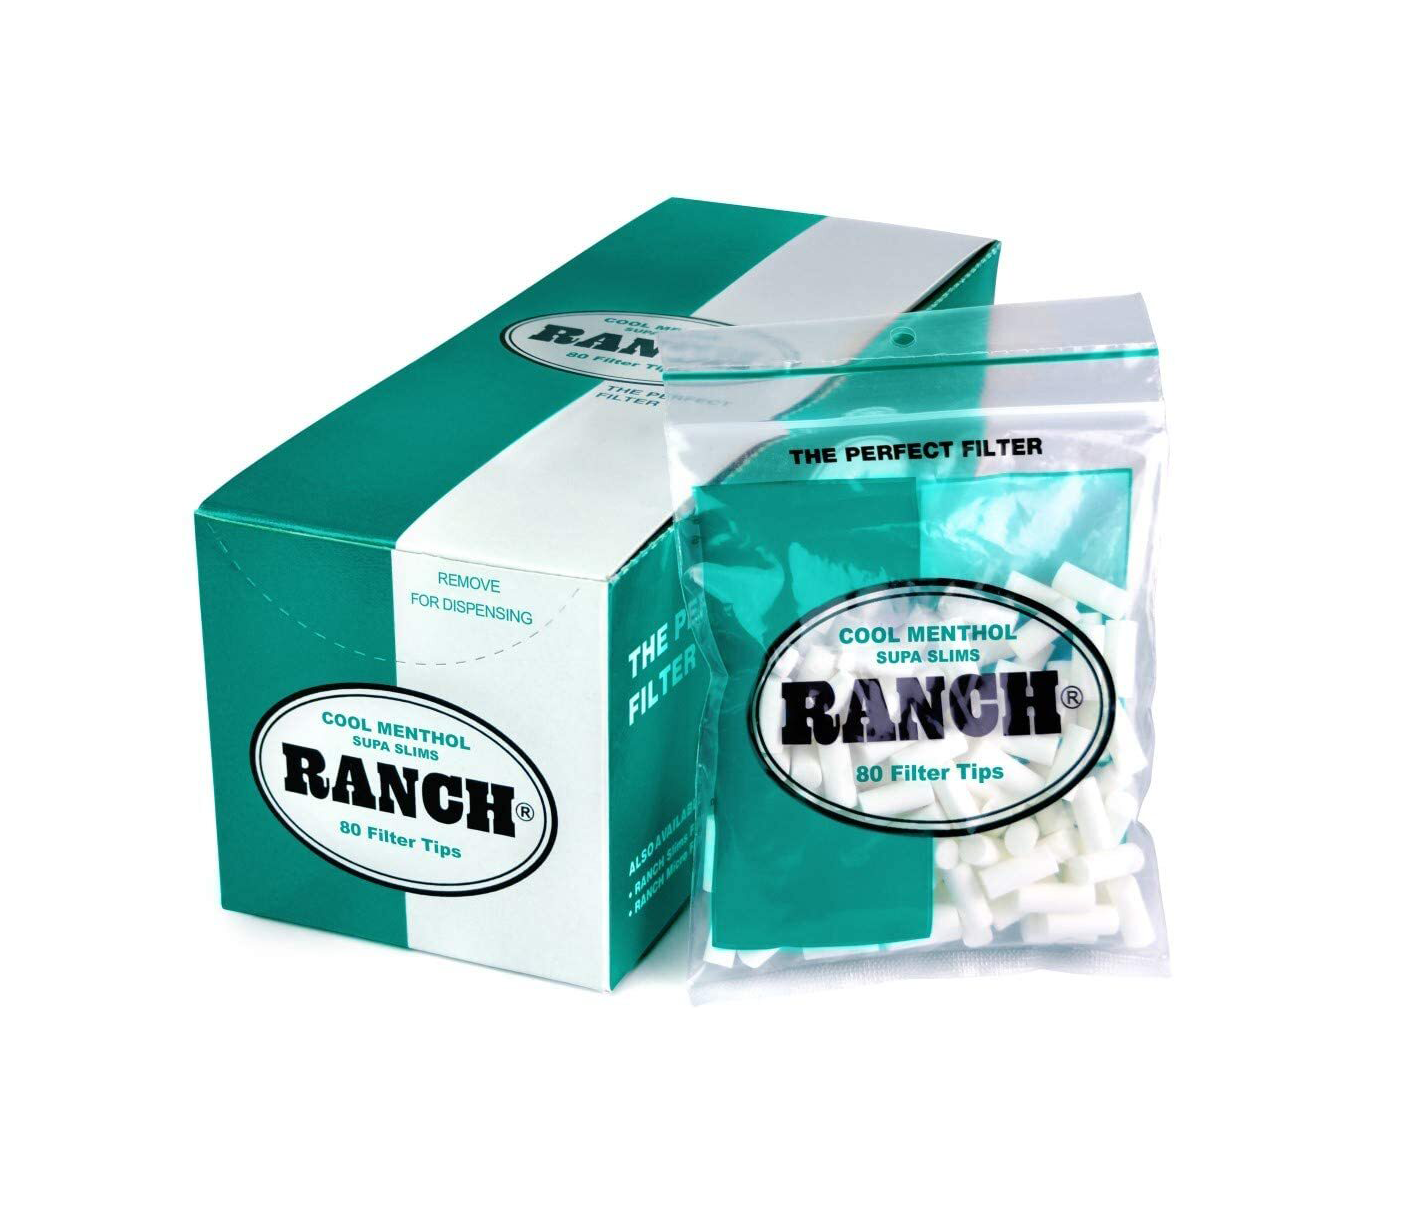 Ranch Filters Cool Menthol Supa Slim (Box of 12) - 20 Boxes